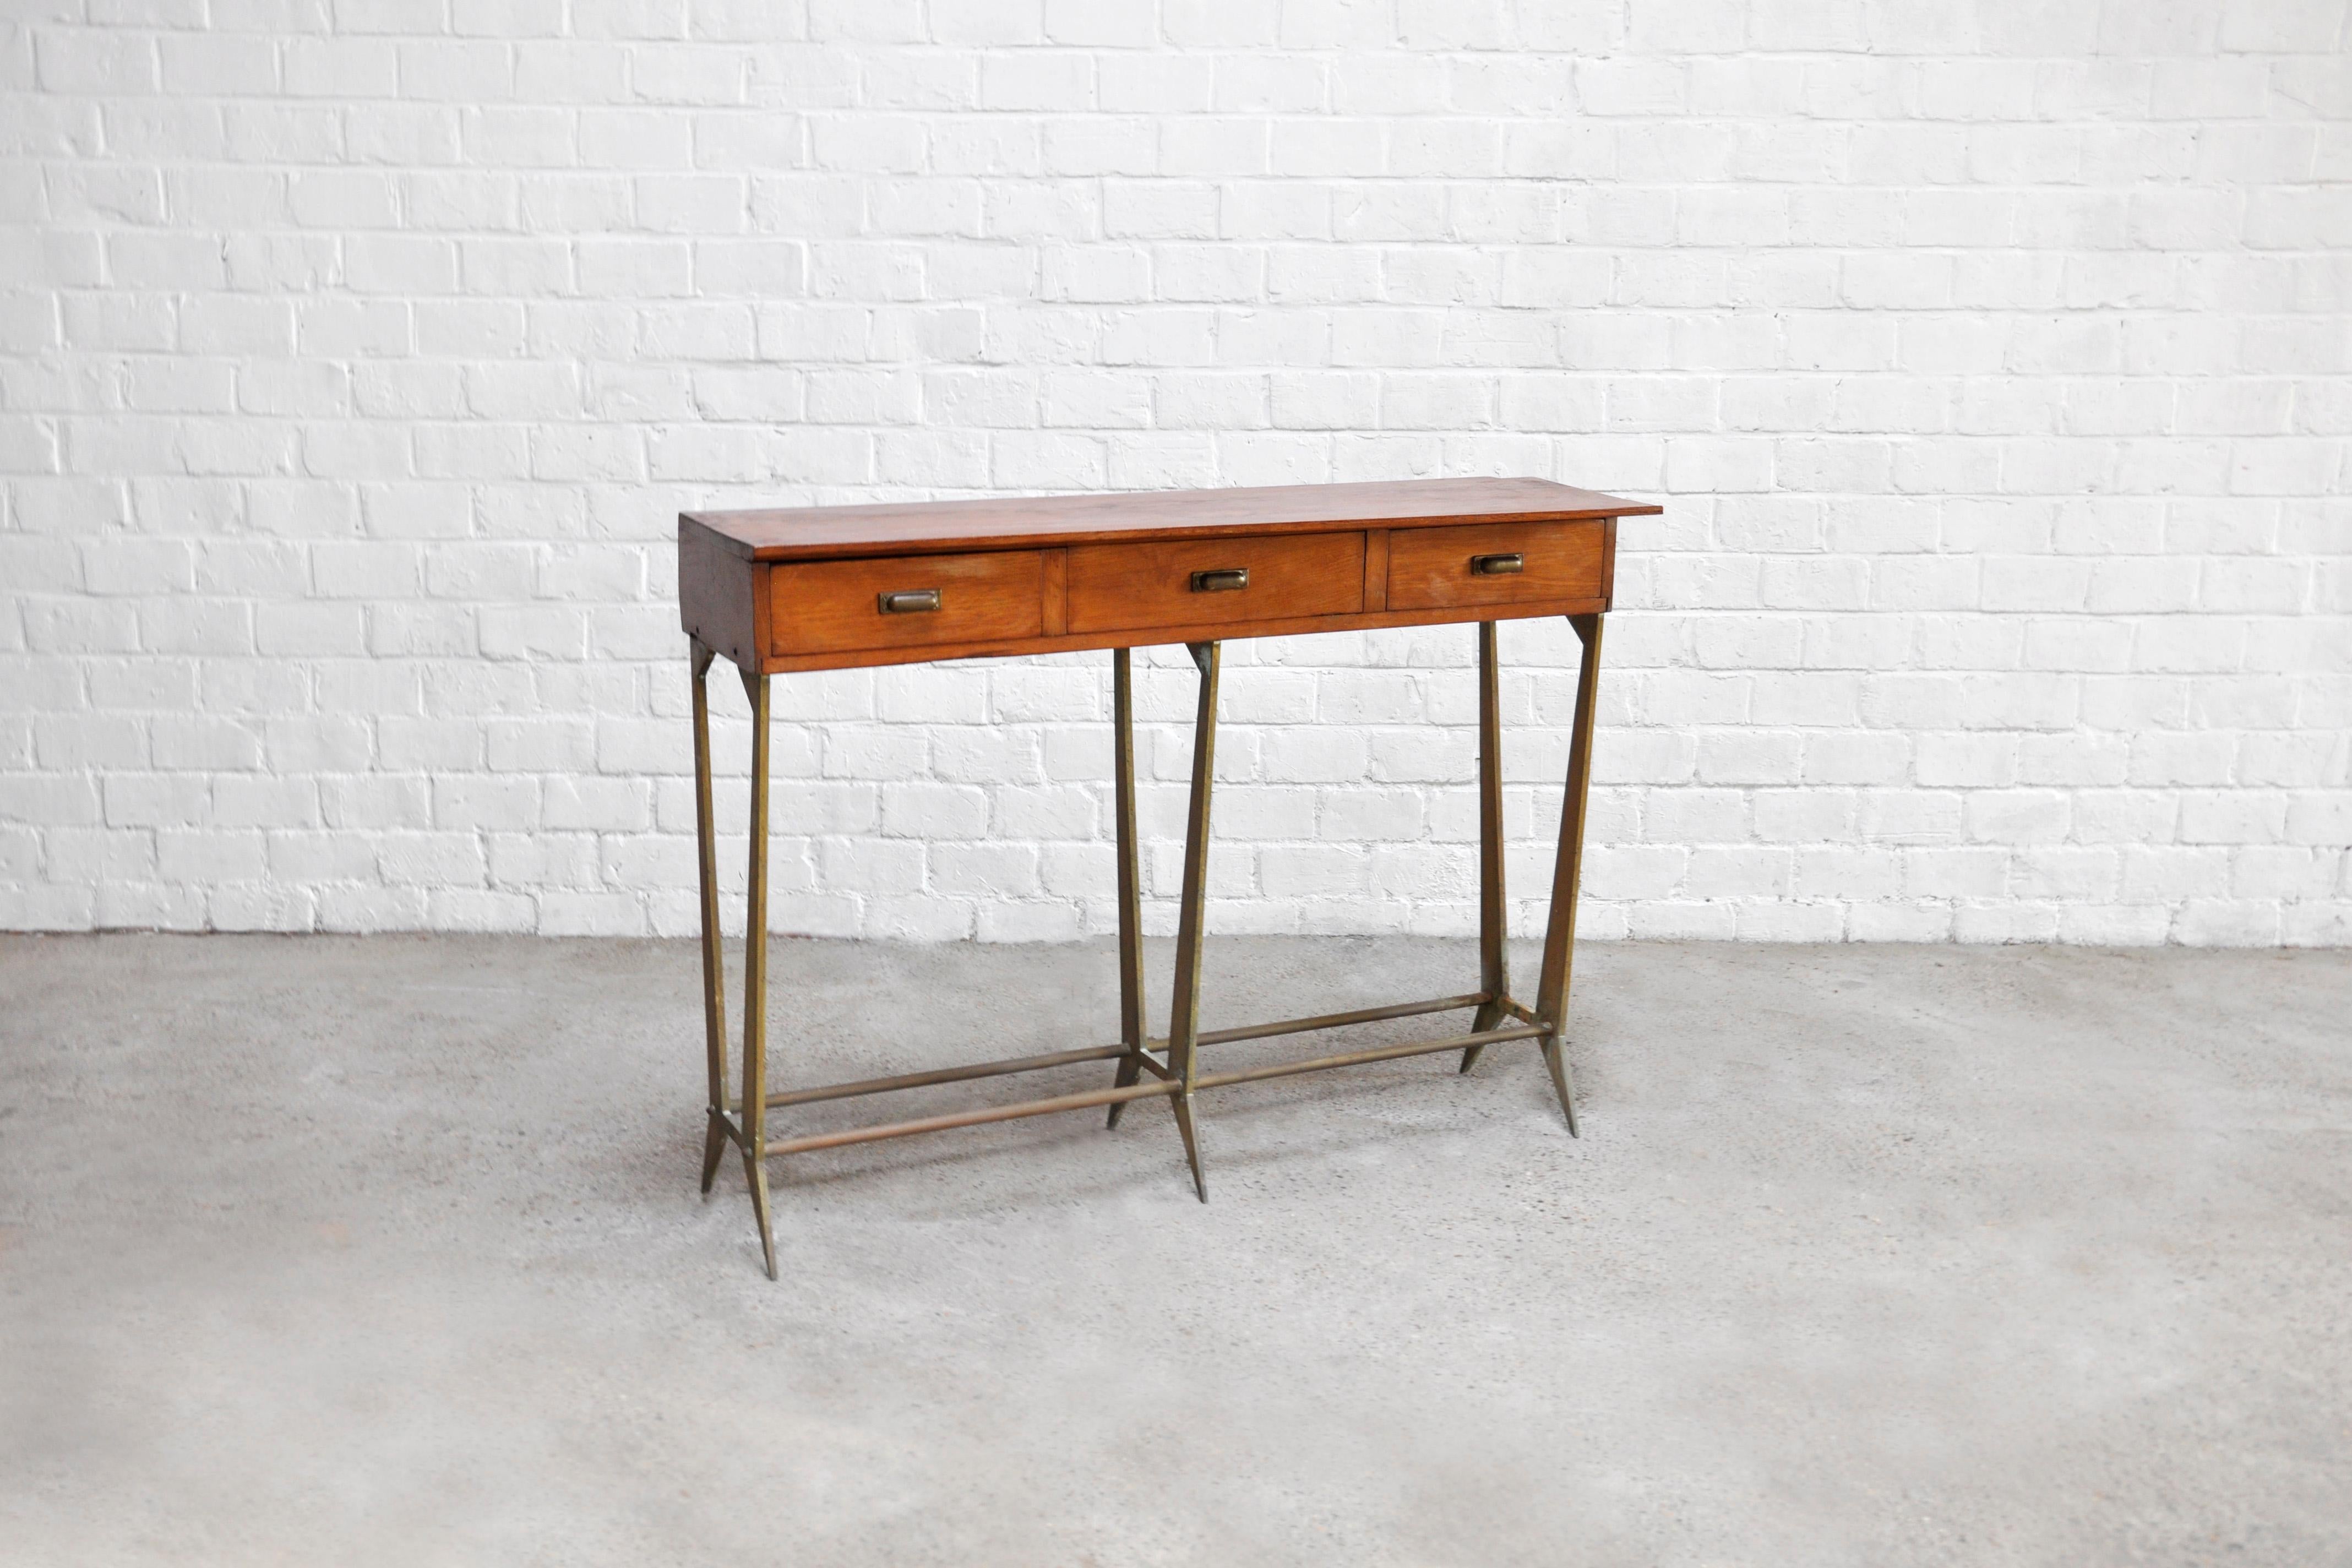 Sculptural Wood & Brass Console Table by Osvaldo Borsani, Italy, 1950s For Sale 1